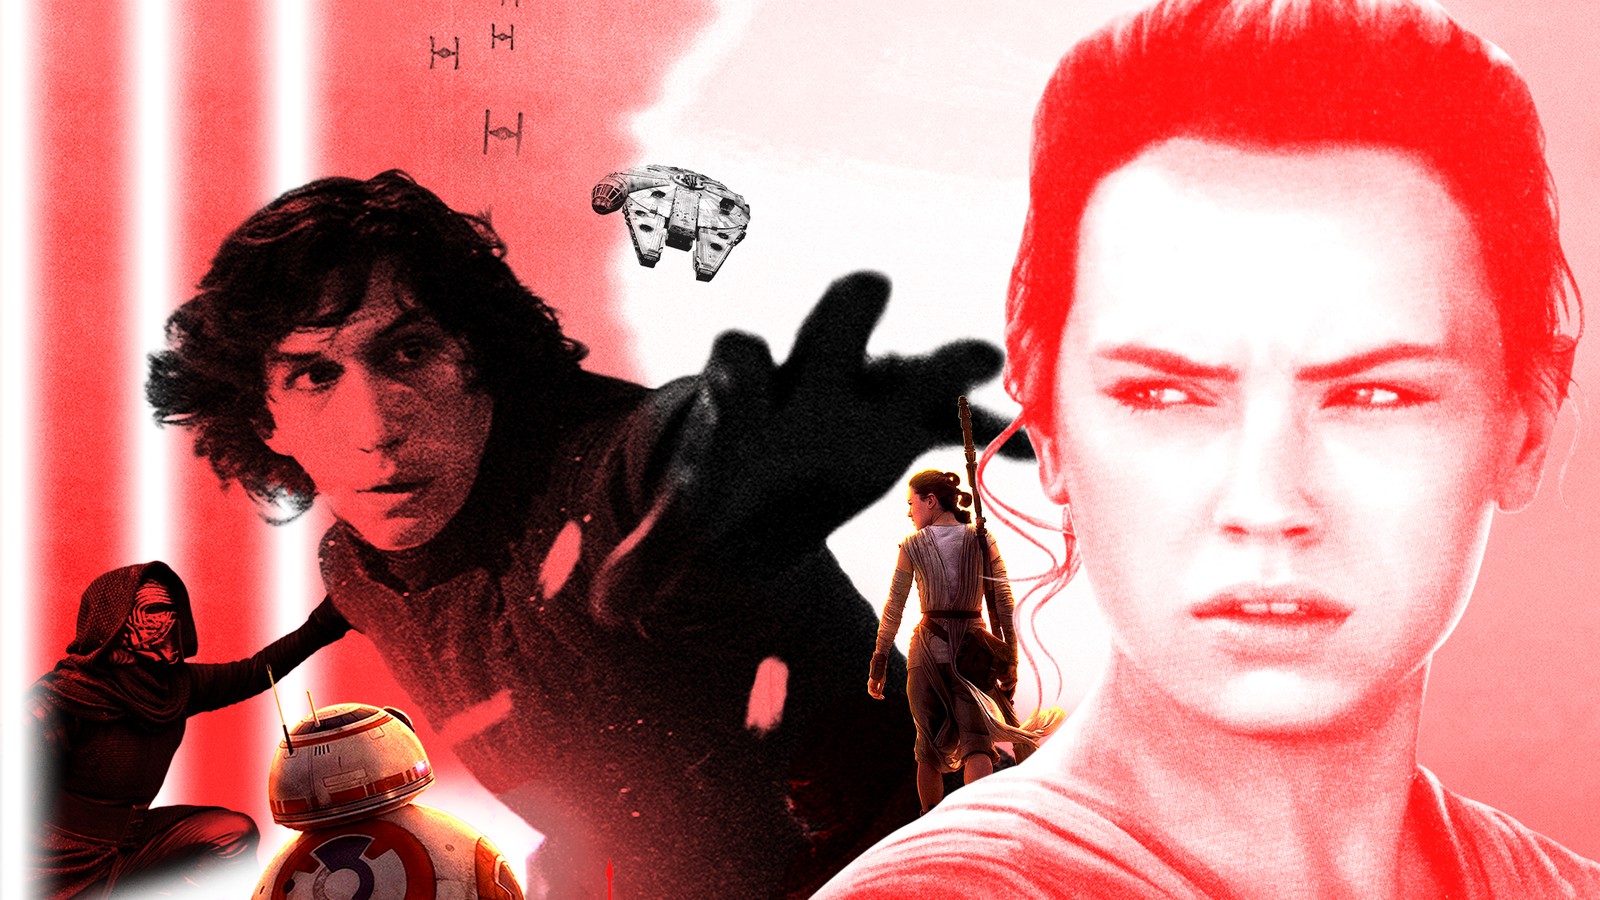 Porn Star Wars Force Awakens - Reylo: The 'Star Wars: The Force Awakens' Fan-Fiction Ship Between Rey and  Kylo Ren Is Popular and Controversial - The Atlantic